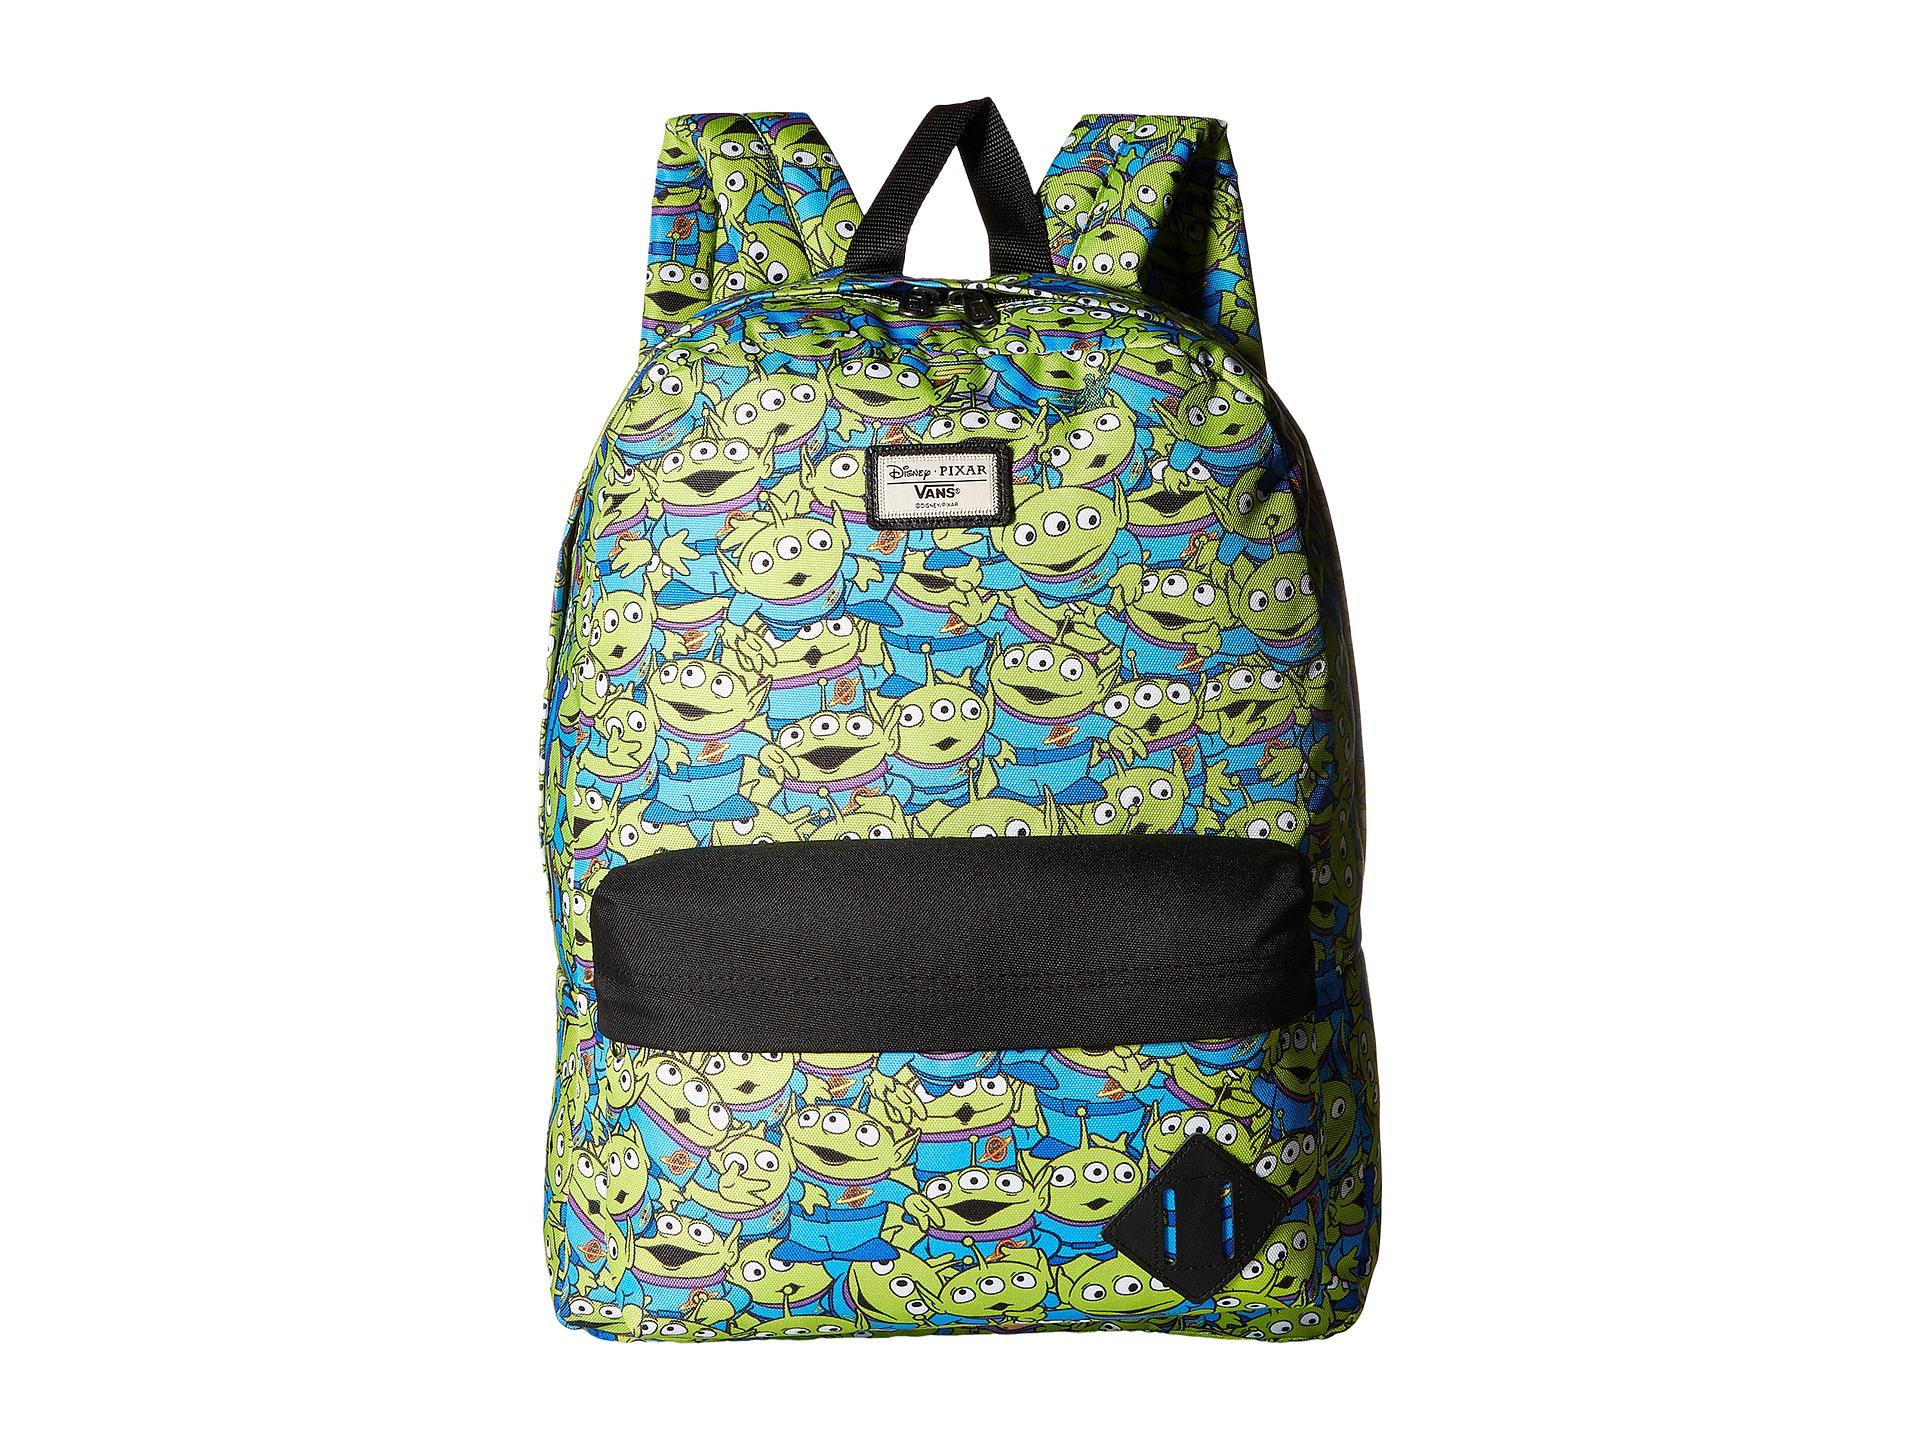 vans x toy story backpack